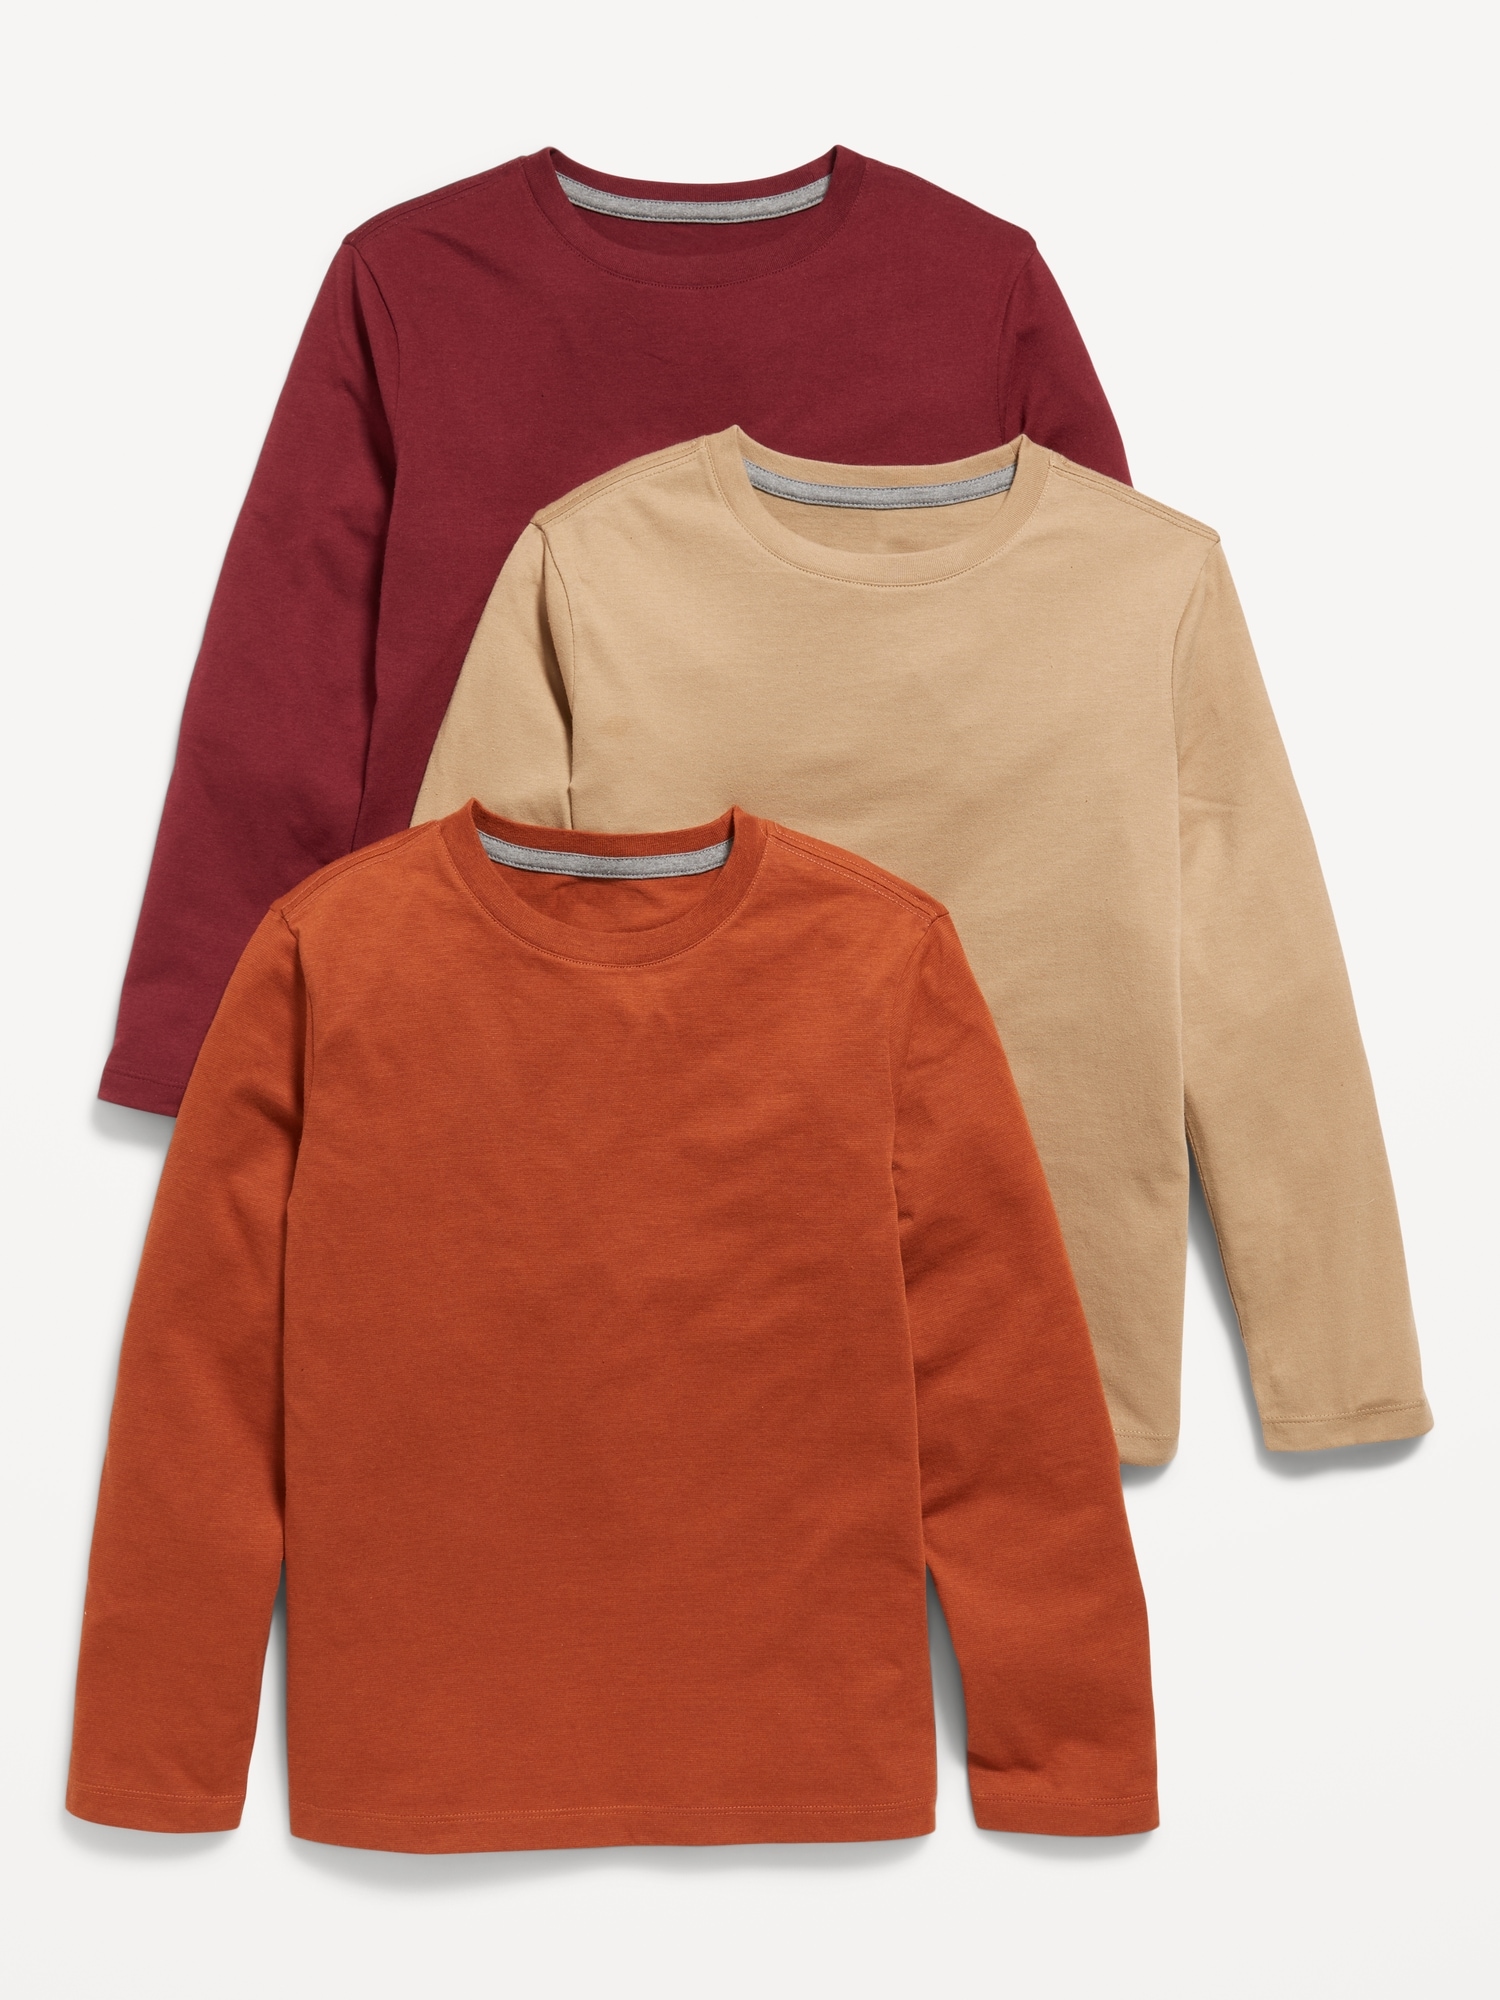 Softest Printed Long-Sleeve T-Shirt 3-Pack for Boys